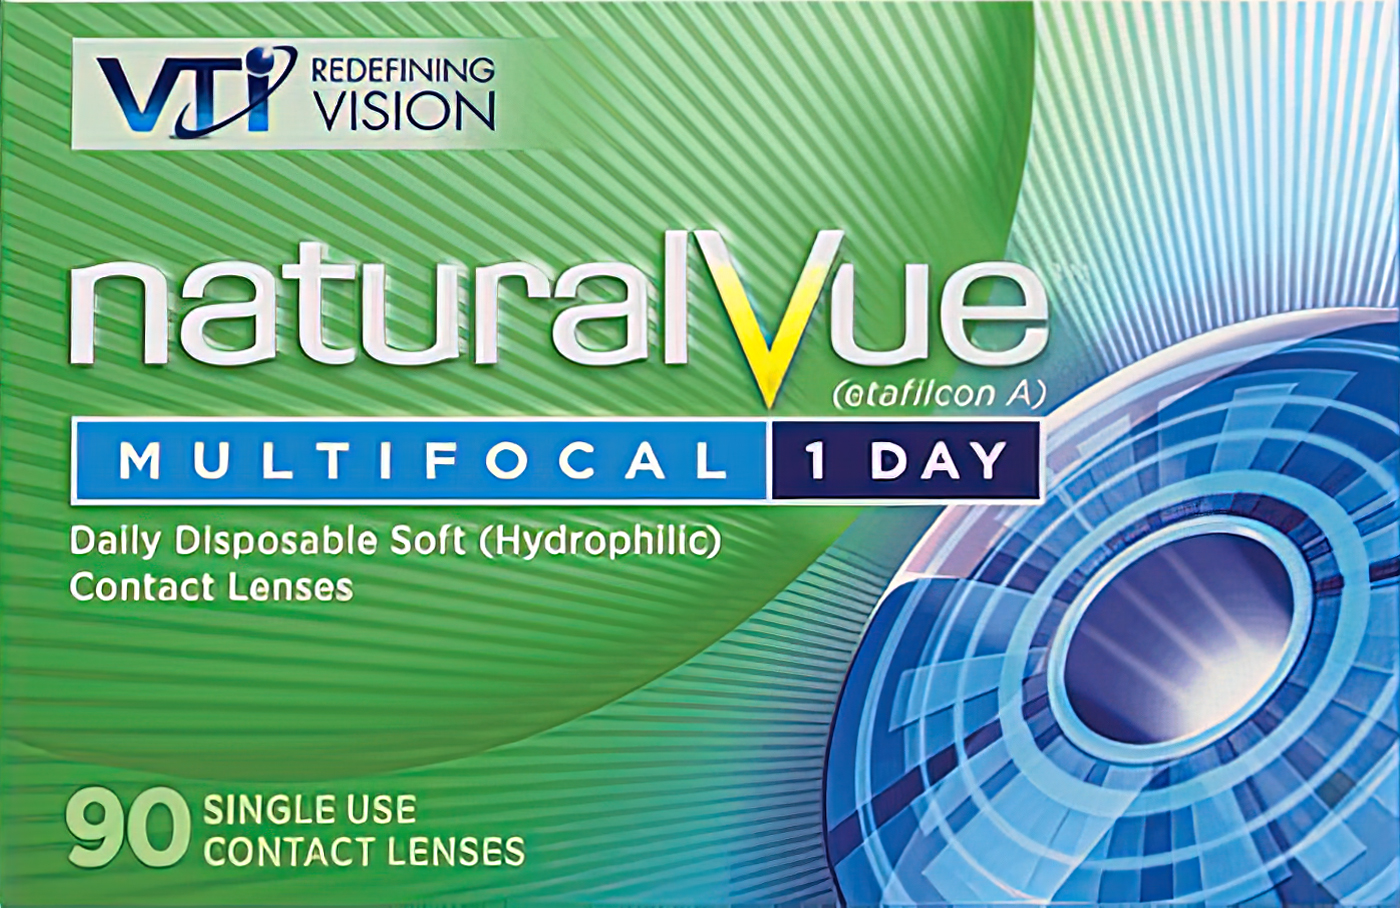 naturalvue-1-day-multifocal-contacts-fabeyecare